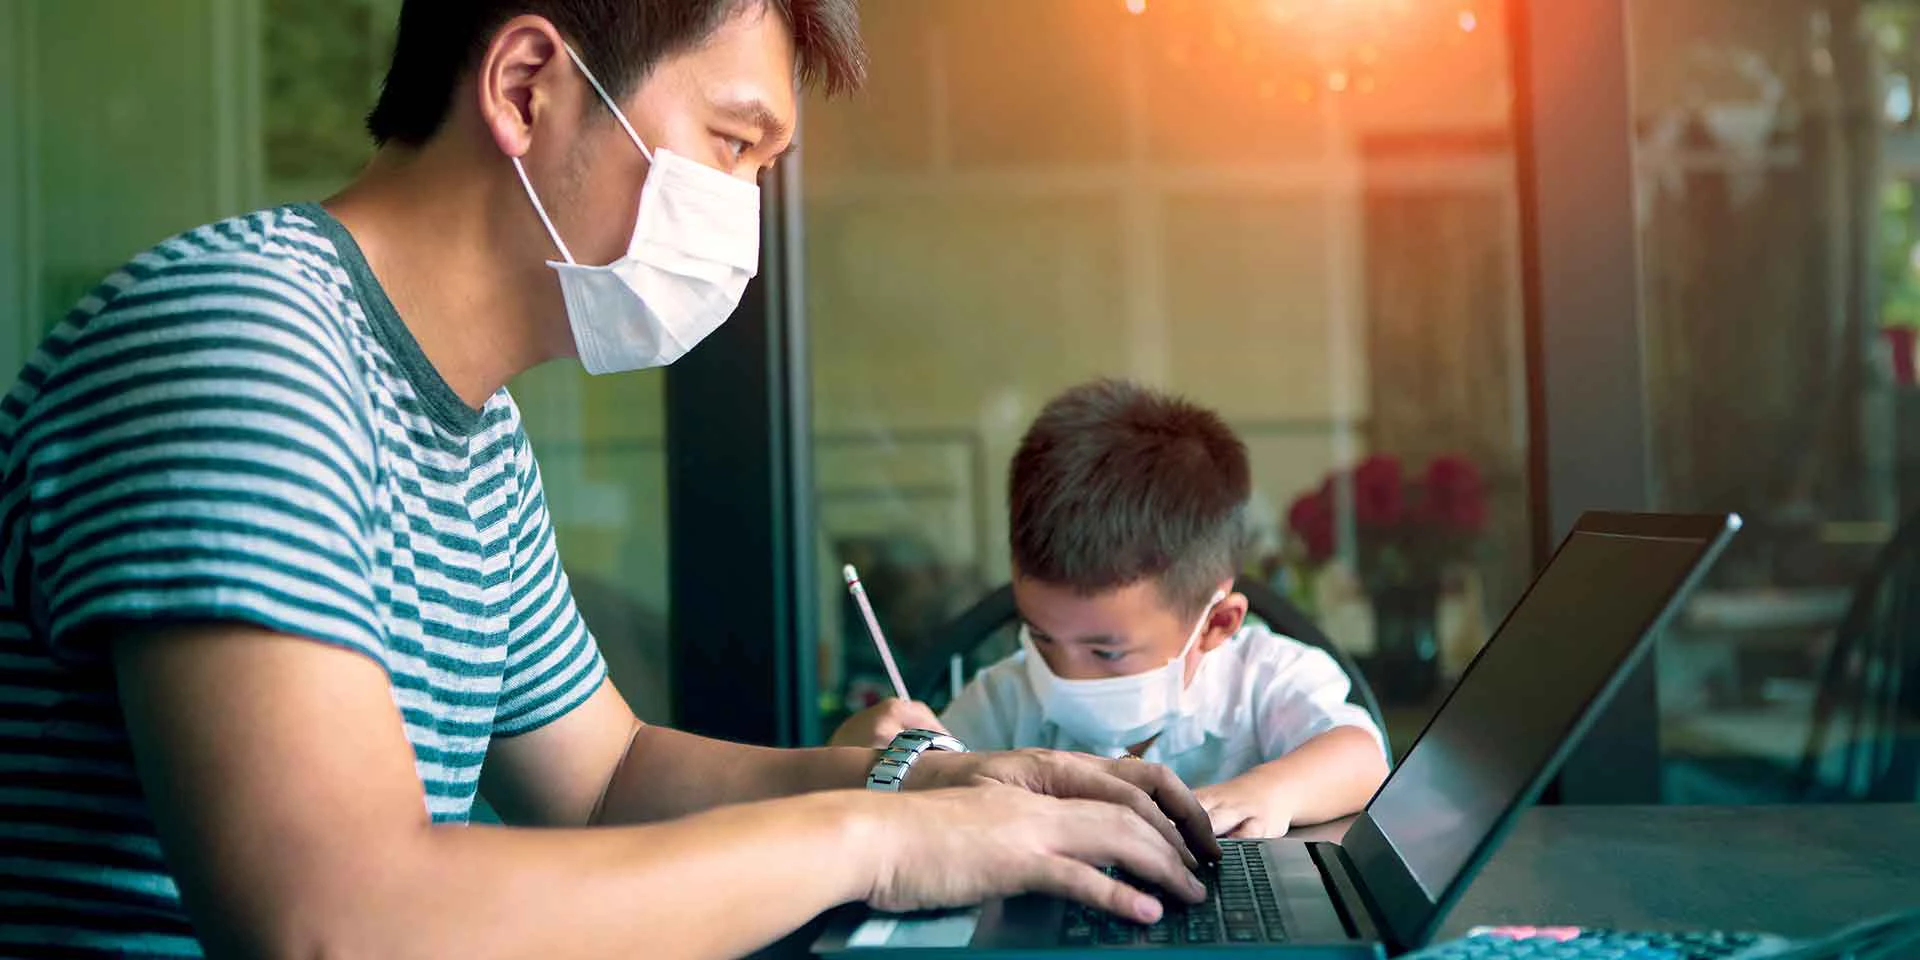 quarantine asian man and children wearing protection mask working on computer at home while covid-19 virus inflected global